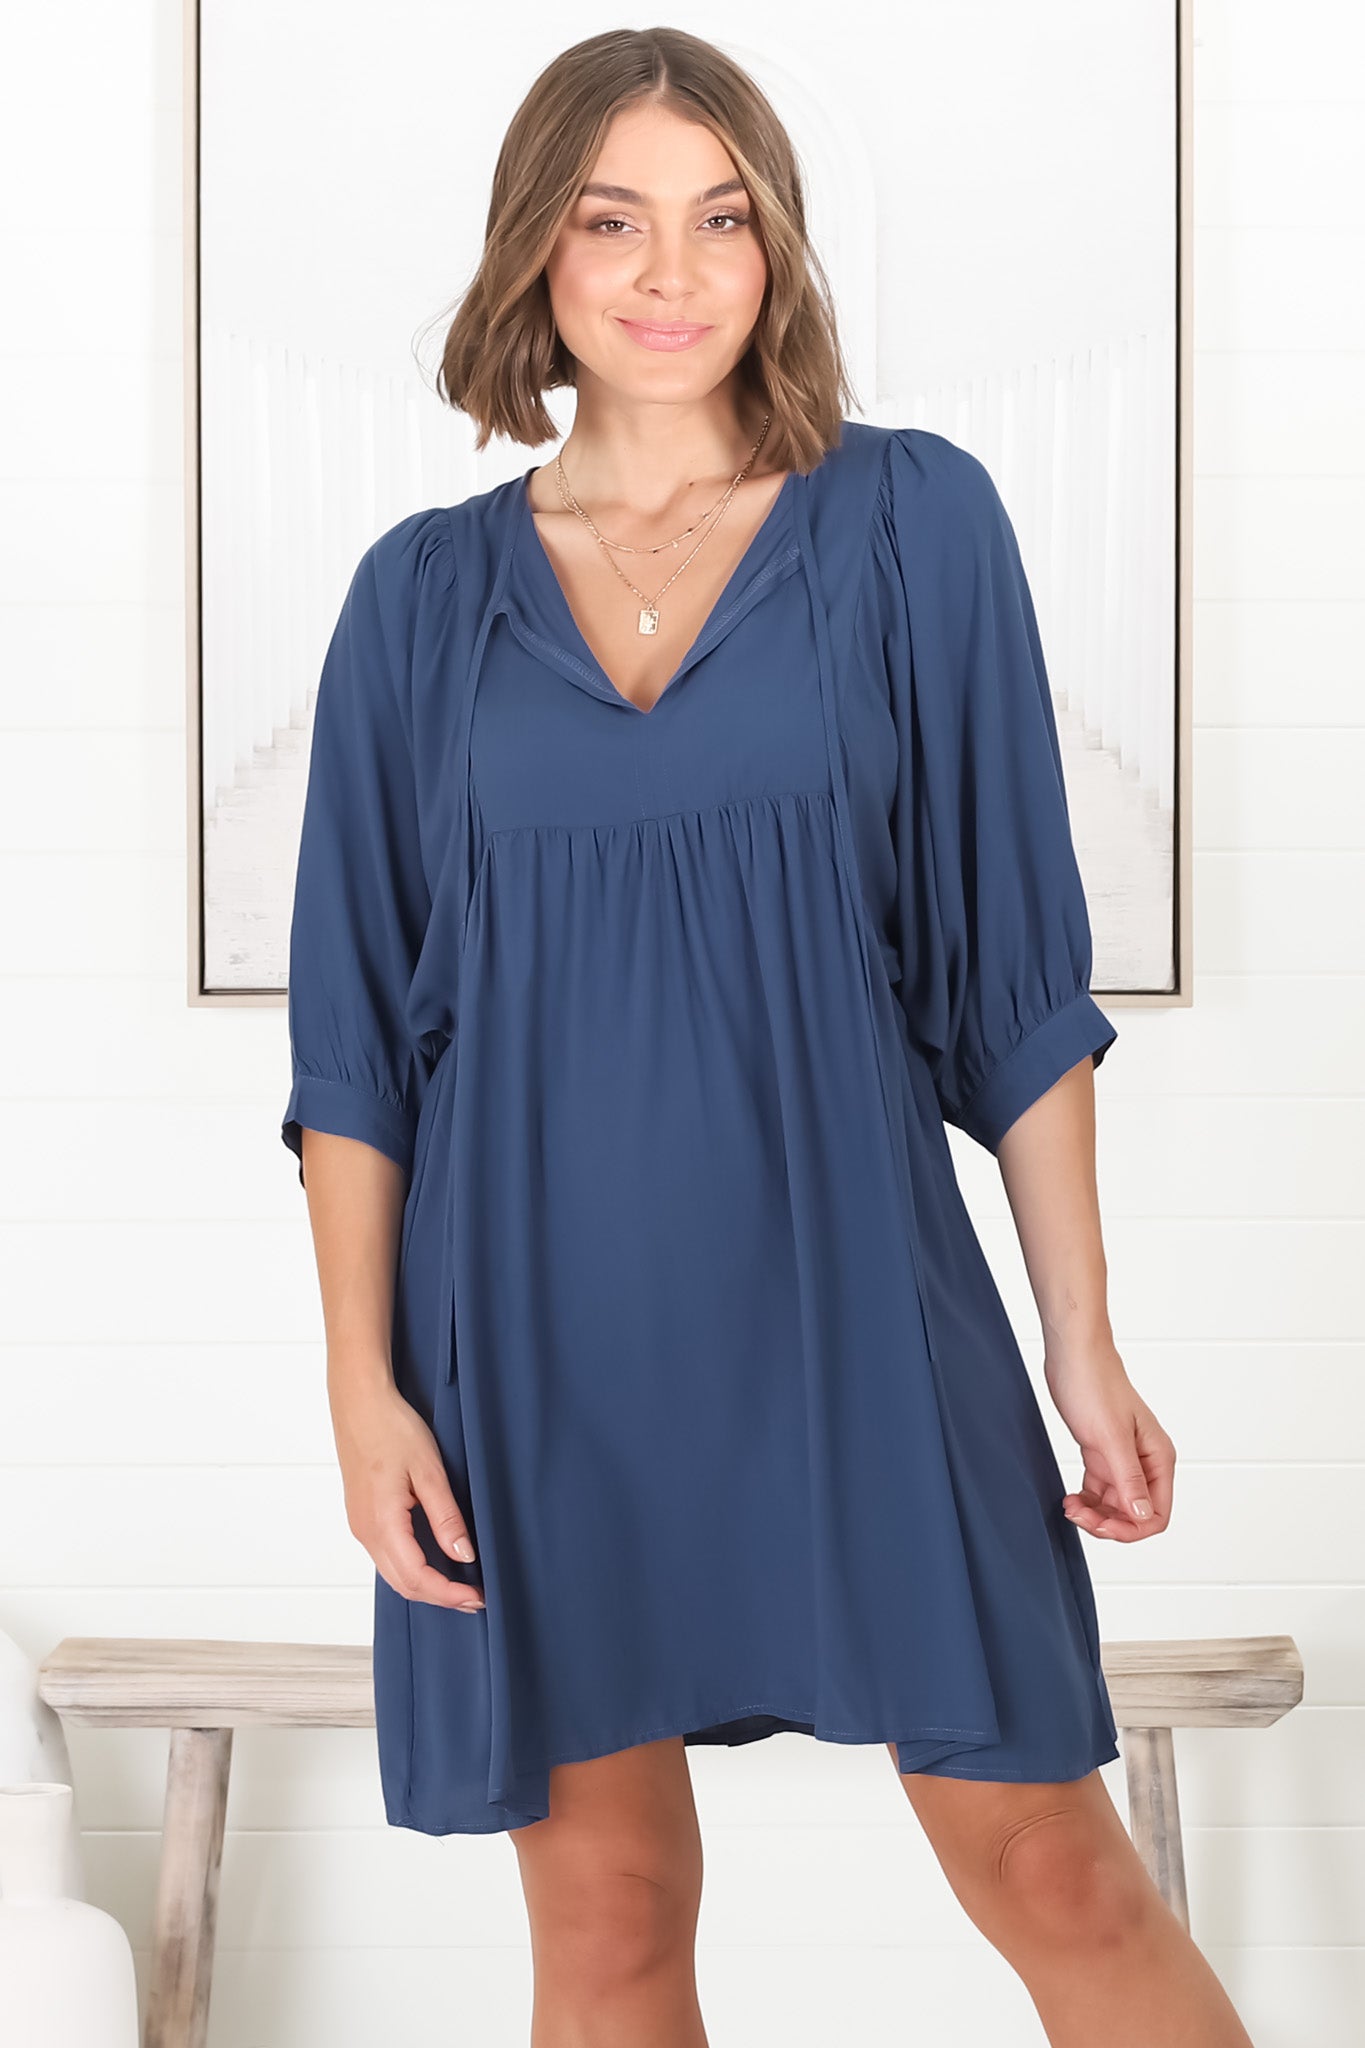 Mariah Mini Dress - V Neck Smock Dress with Batwing Sleeves in Navy